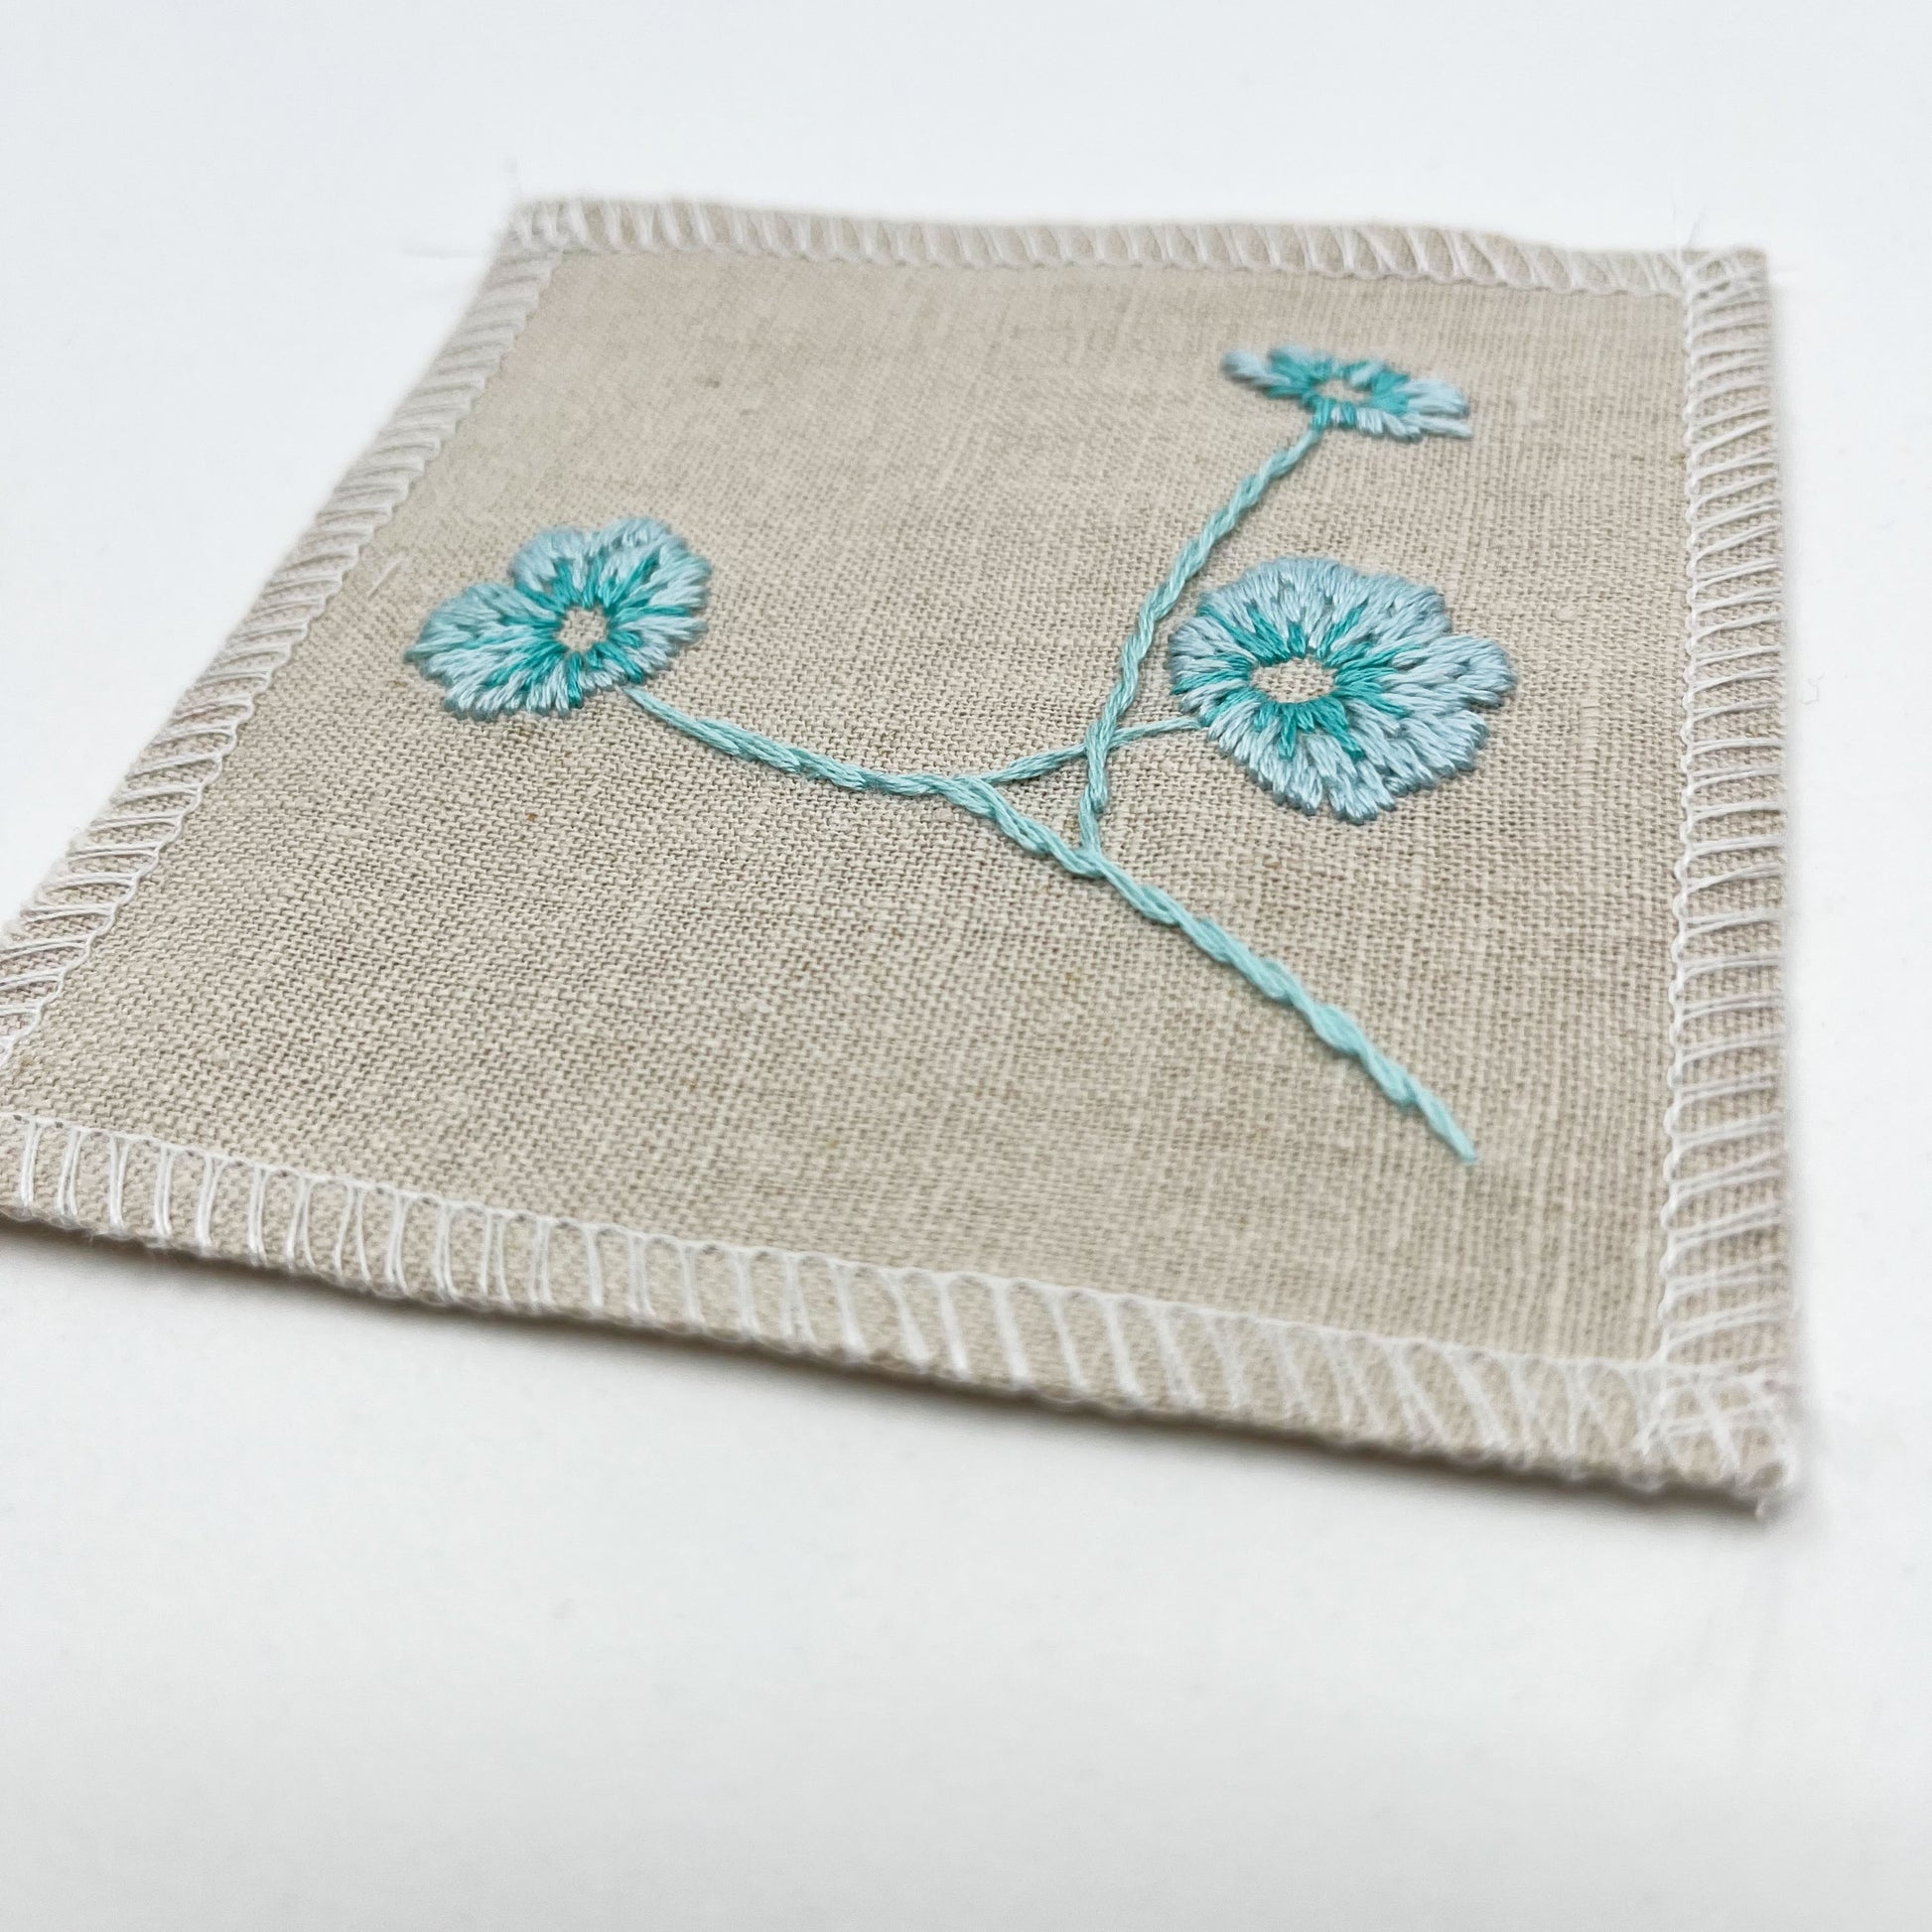 a close up angled view of a natural colored square patch, hand embroidered with three poppies on a stem, in shades of robin's egg blue, with overlocked edges, on a white background